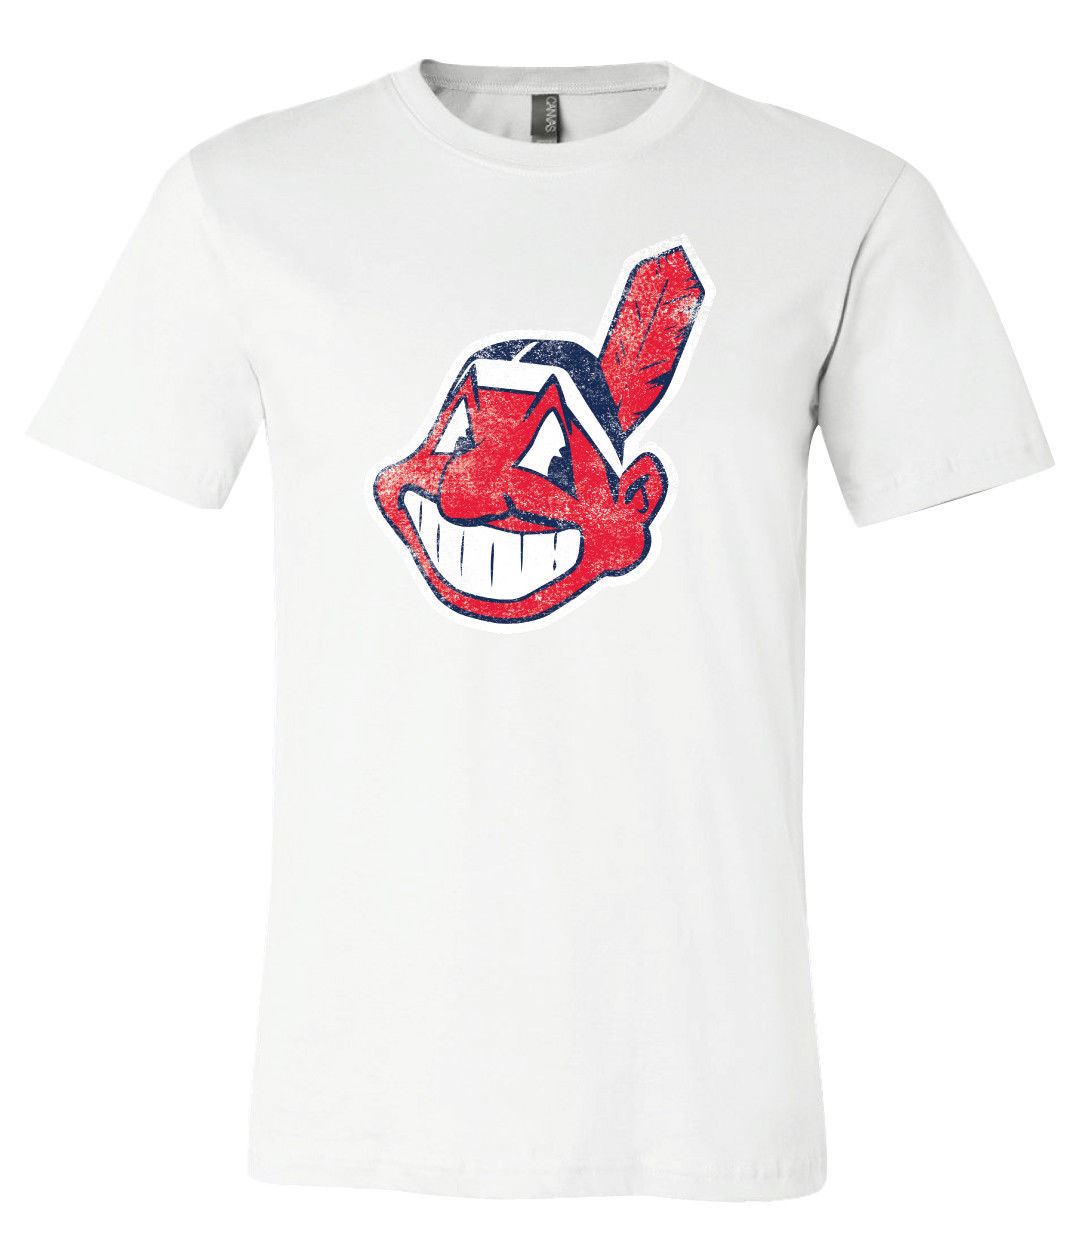 Cleveland Indians Mascot Chief Wahoo Distressed Vintage logo T-shirt S